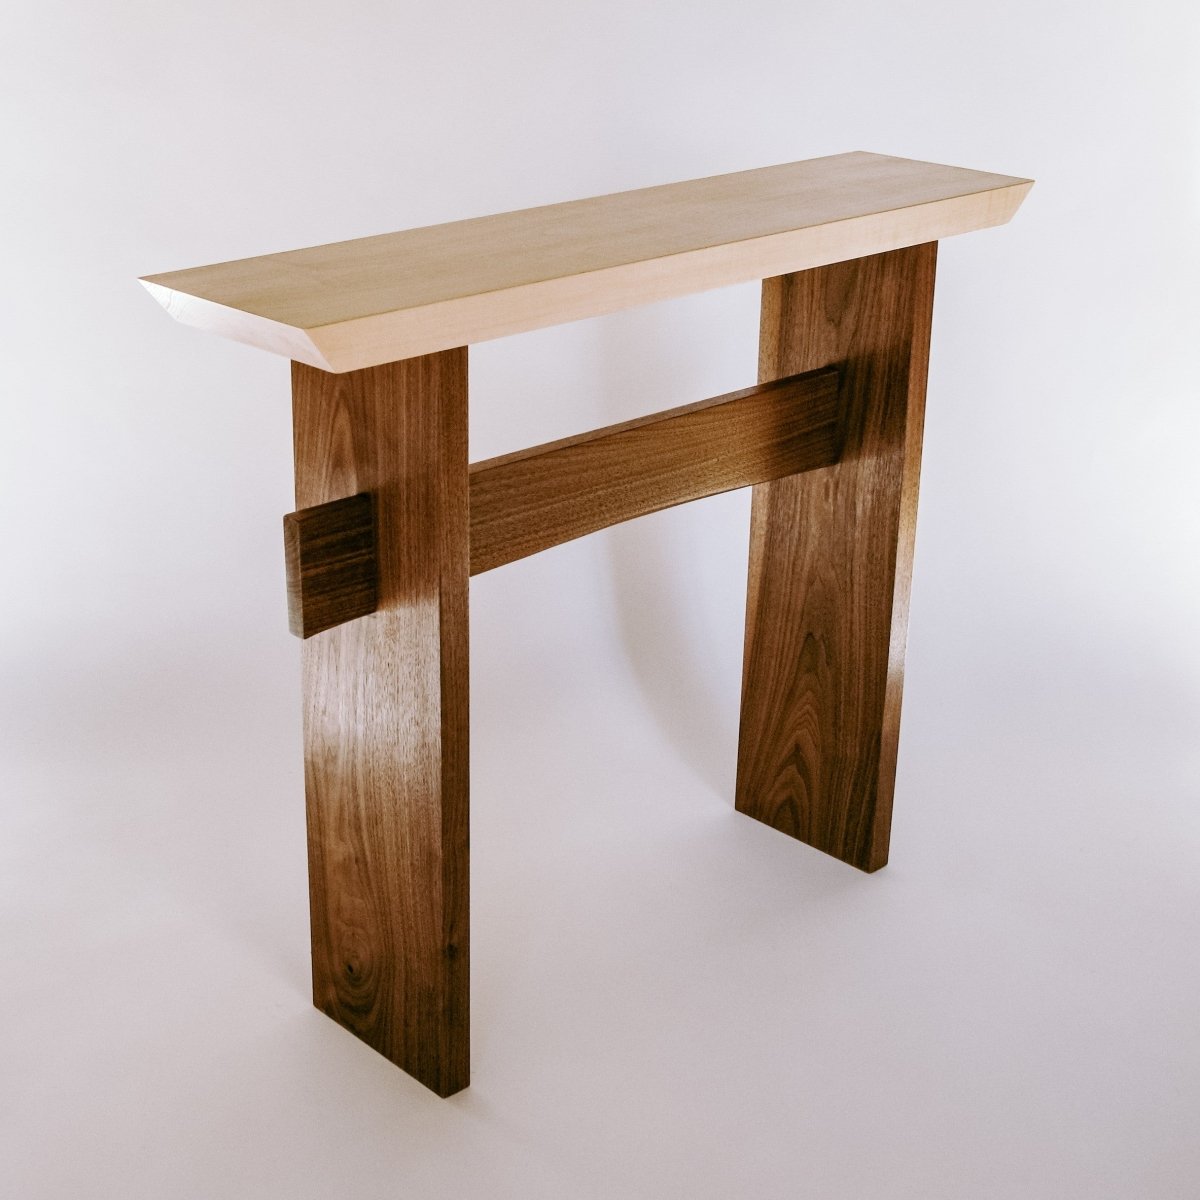 modern wood table designed for narrow hallway decorating or entryway decor - narrow hall console by Mokuzai Furniture - The Statement Hall Table